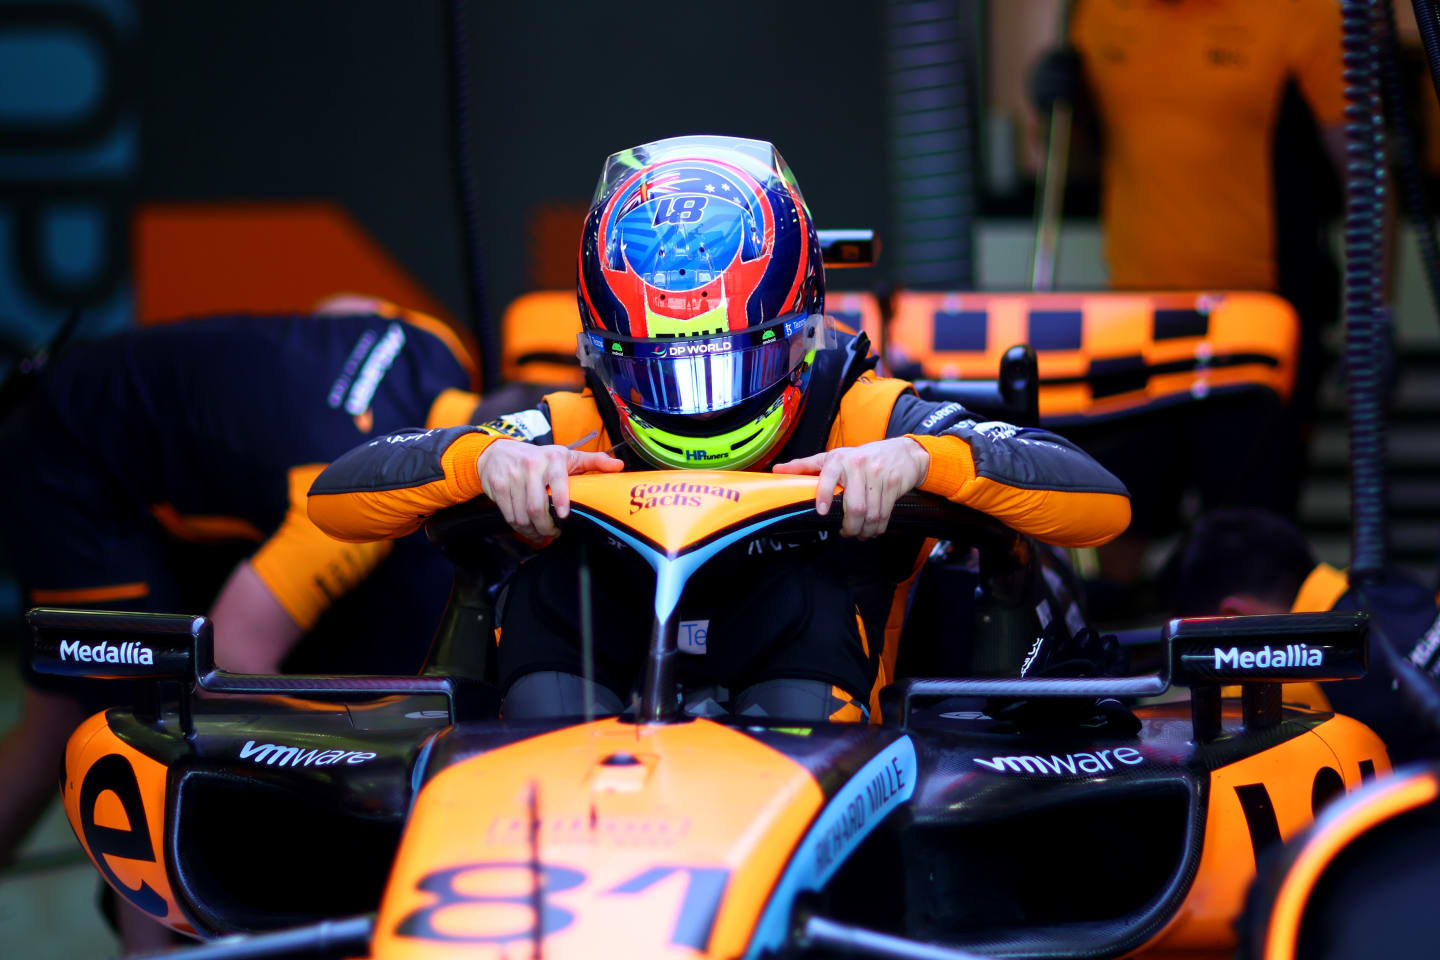 BAHRAIN, BAHRAIN - FEBRUARY 23: Oscar Piastri of Australia and McLaren prepares to drive in the garage during day one of F1 Testing at Bahrain International Circuit on February 23, 2023 in Bahrain, Bahrai